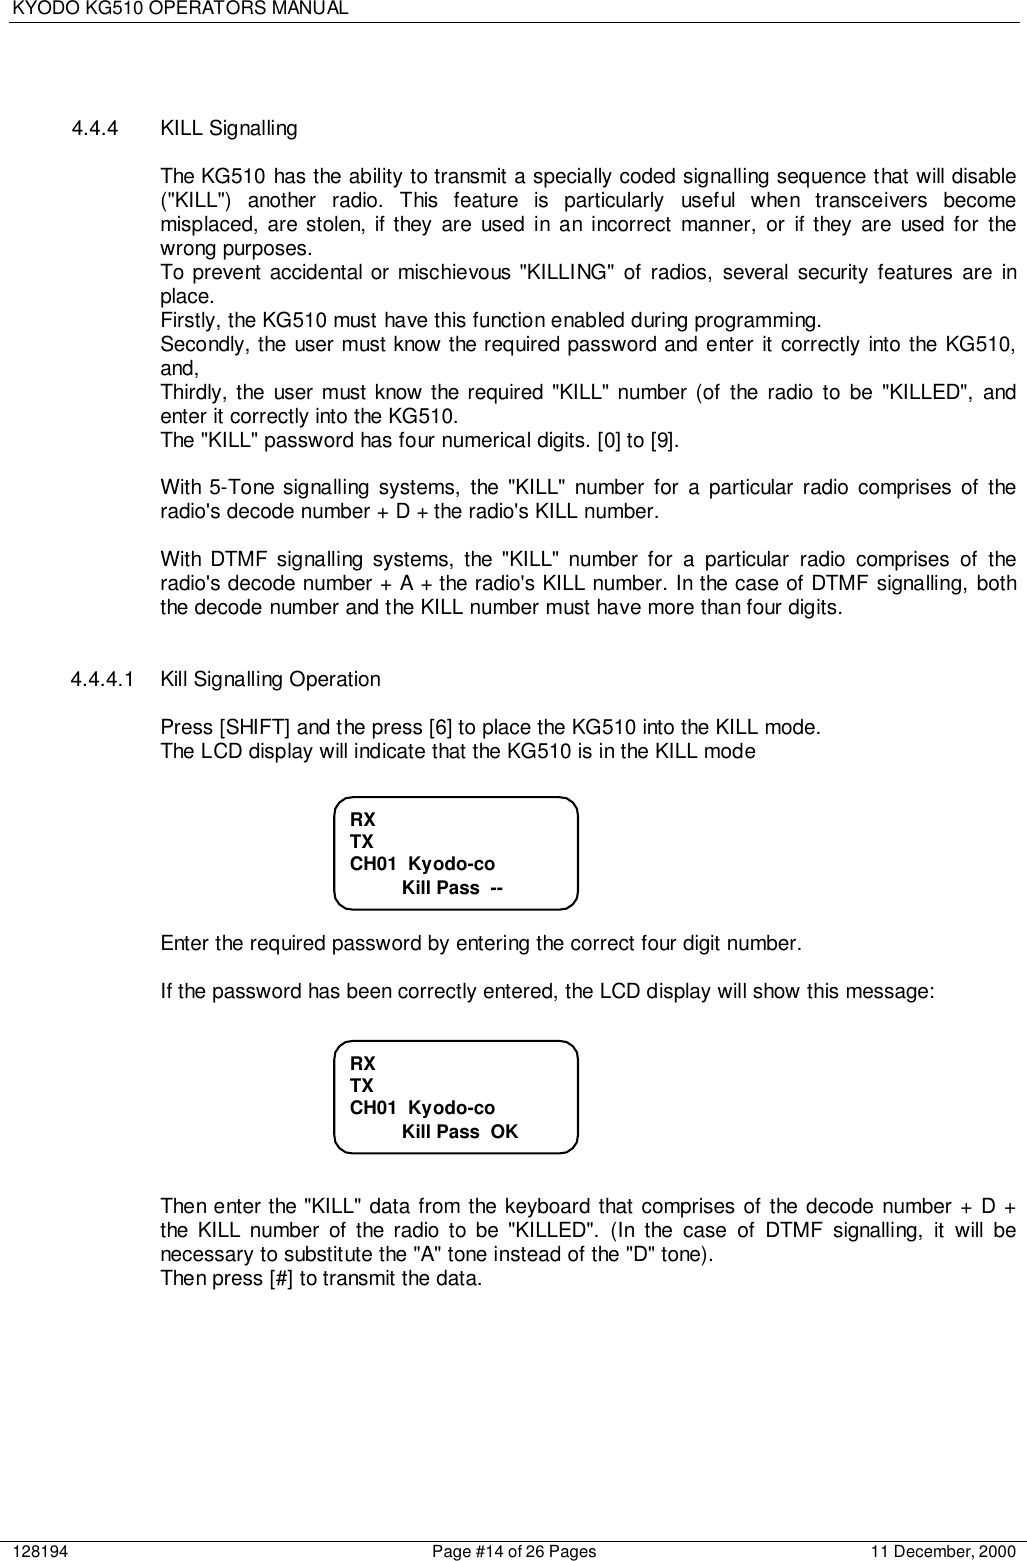 KYODO KG510 OPERATORS MANUAL128194 Page #14 of 26 Pages 11 December, 20004.4.4 KILL SignallingThe KG510 has the ability to transmit a specially coded signalling sequence that will disable(&quot;KILL&quot;) another radio. This feature is particularly useful when transceivers becomemisplaced, are stolen, if they are used in an incorrect manner, or if they are used for thewrong purposes.To prevent accidental or mischievous &quot;KILLING&quot; of radios, several security features are inplace.Firstly, the KG510 must have this function enabled during programming.Secondly, the user must know the required password and enter it correctly into the KG510,and,Thirdly, the user must know the required &quot;KILL&quot; number (of the radio to be &quot;KILLED&quot;, andenter it correctly into the KG510.The &quot;KILL&quot; password has four numerical digits. [0] to [9].With 5-Tone signalling systems, the &quot;KILL&quot; number for a particular radio comprises of theradio&apos;s decode number + D + the radio&apos;s KILL number.With DTMF signalling systems, the &quot;KILL&quot; number for a particular radio comprises of theradio&apos;s decode number + A + the radio&apos;s KILL number. In the case of DTMF signalling, boththe decode number and the KILL number must have more than four digits.4.4.4.1  Kill Signalling OperationPress [SHIFT] and the press [6] to place the KG510 into the KILL mode.The LCD display will indicate that the KG510 is in the KILL modeEnter the required password by entering the correct four digit number.If the password has been correctly entered, the LCD display will show this message:Then enter the &quot;KILL&quot; data from the keyboard that comprises of the decode number + D +the KILL number of the radio to be &quot;KILLED&quot;. (In the case of DTMF signalling, it will benecessary to substitute the &quot;A&quot; tone instead of the &quot;D&quot; tone).Then press [#] to transmit the data.RXTXCH01  Kyodo-co          Kill Pass  OKRXTXCH01  Kyodo-co          Kill Pass  --